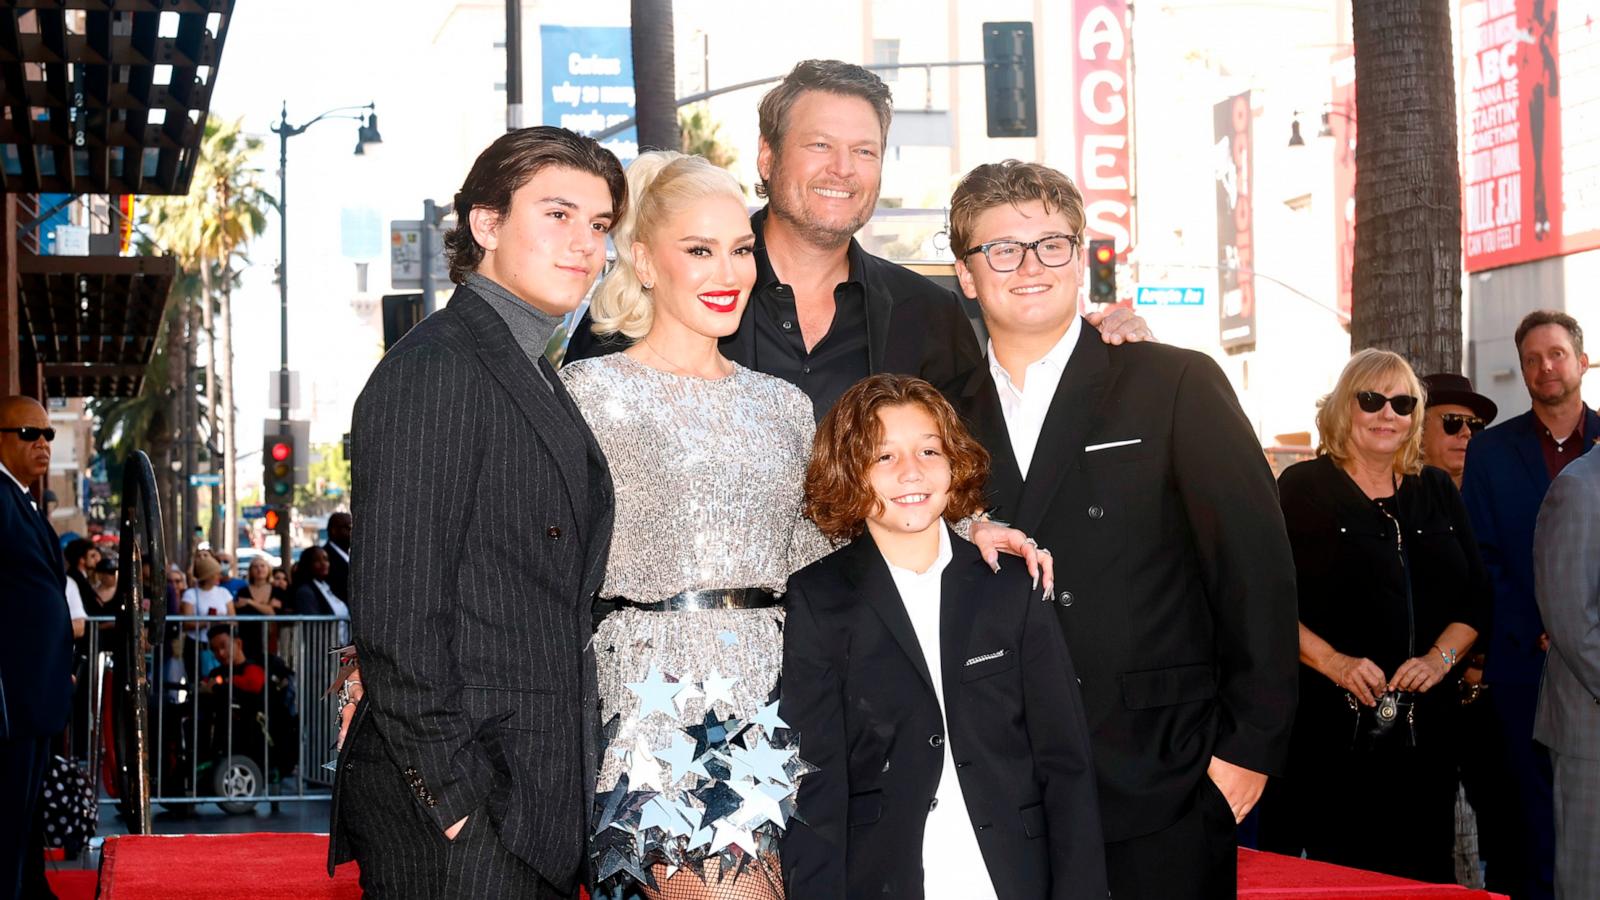 PHOTO: In this Oct. 19, 2023, file photo, Kingston Rossdale, Gwen Stefani, Apollo Rossdale, Blake Shelton and Zuma Rossdale attend the Hollywood Walk of Fame Star Ceremony Honoring Gwen Stefani, in Hollywood, Calif.